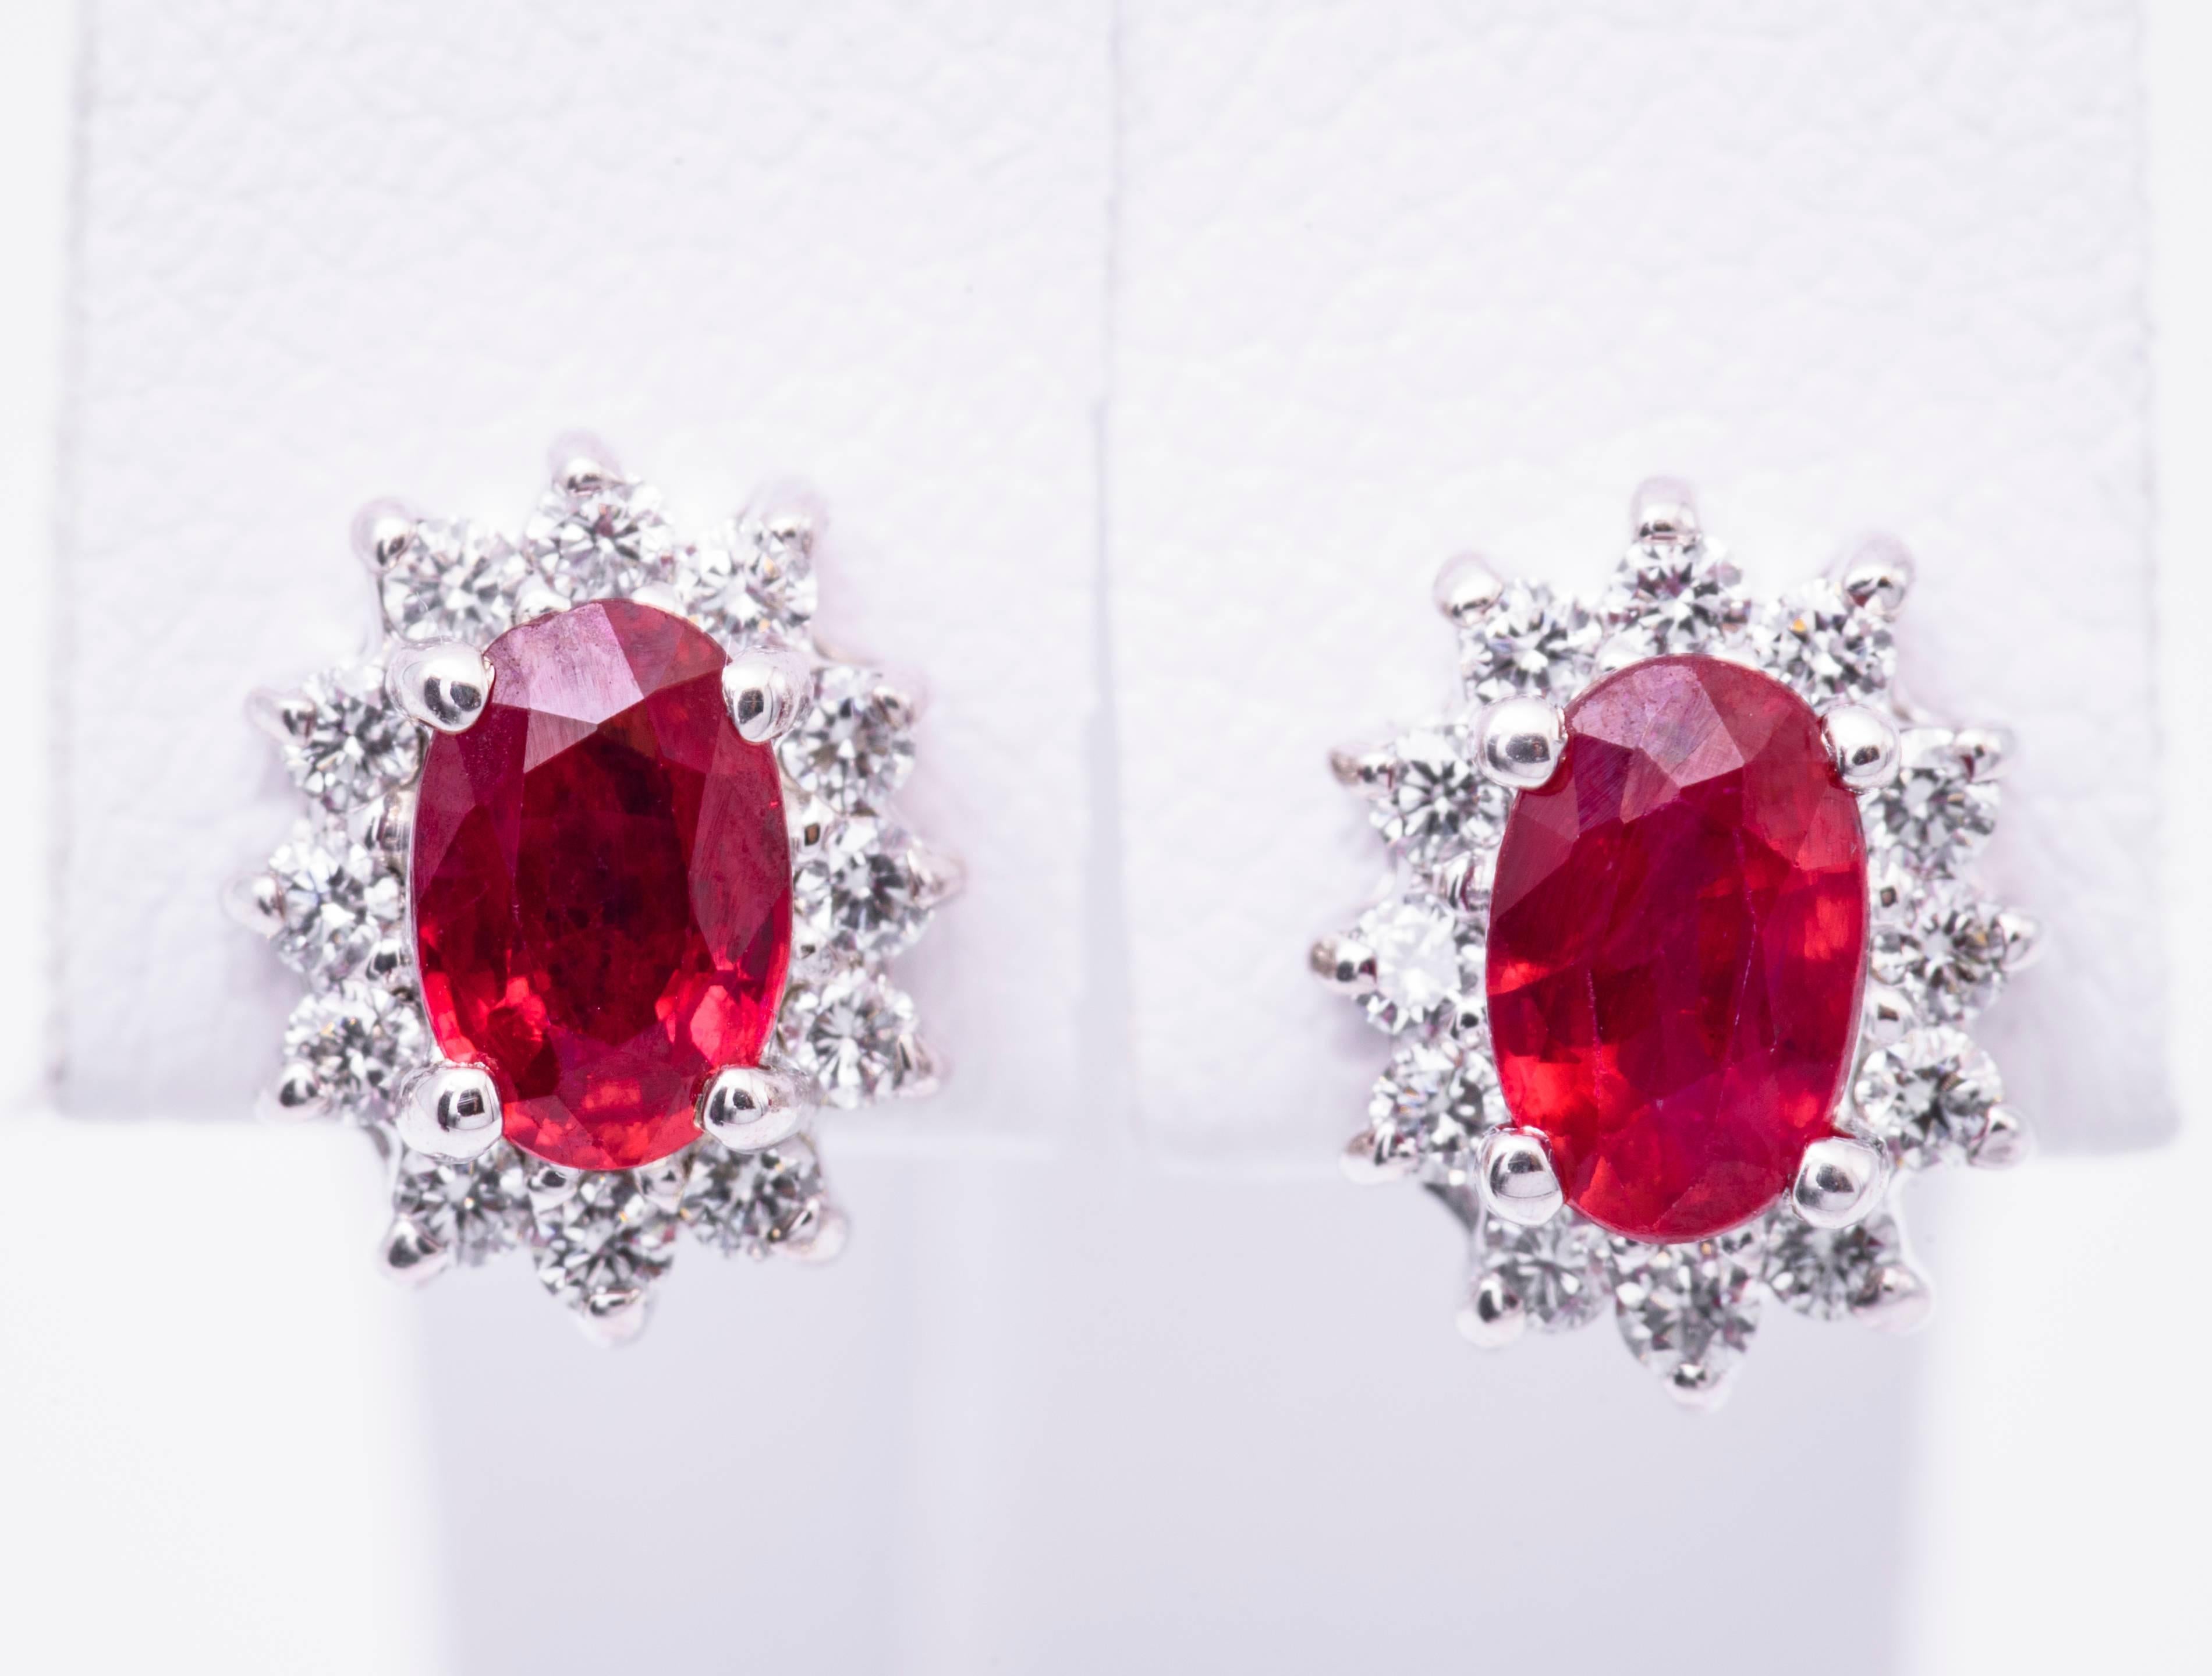 14K white gold
Ruby measuring 5 x 3 and 1.10 Cts.
Earring measuring 9 x 7 mm 
Diamonds: 0.32 Cts
All our gemstones are genuine and sourced with the highest degree of integrity.
